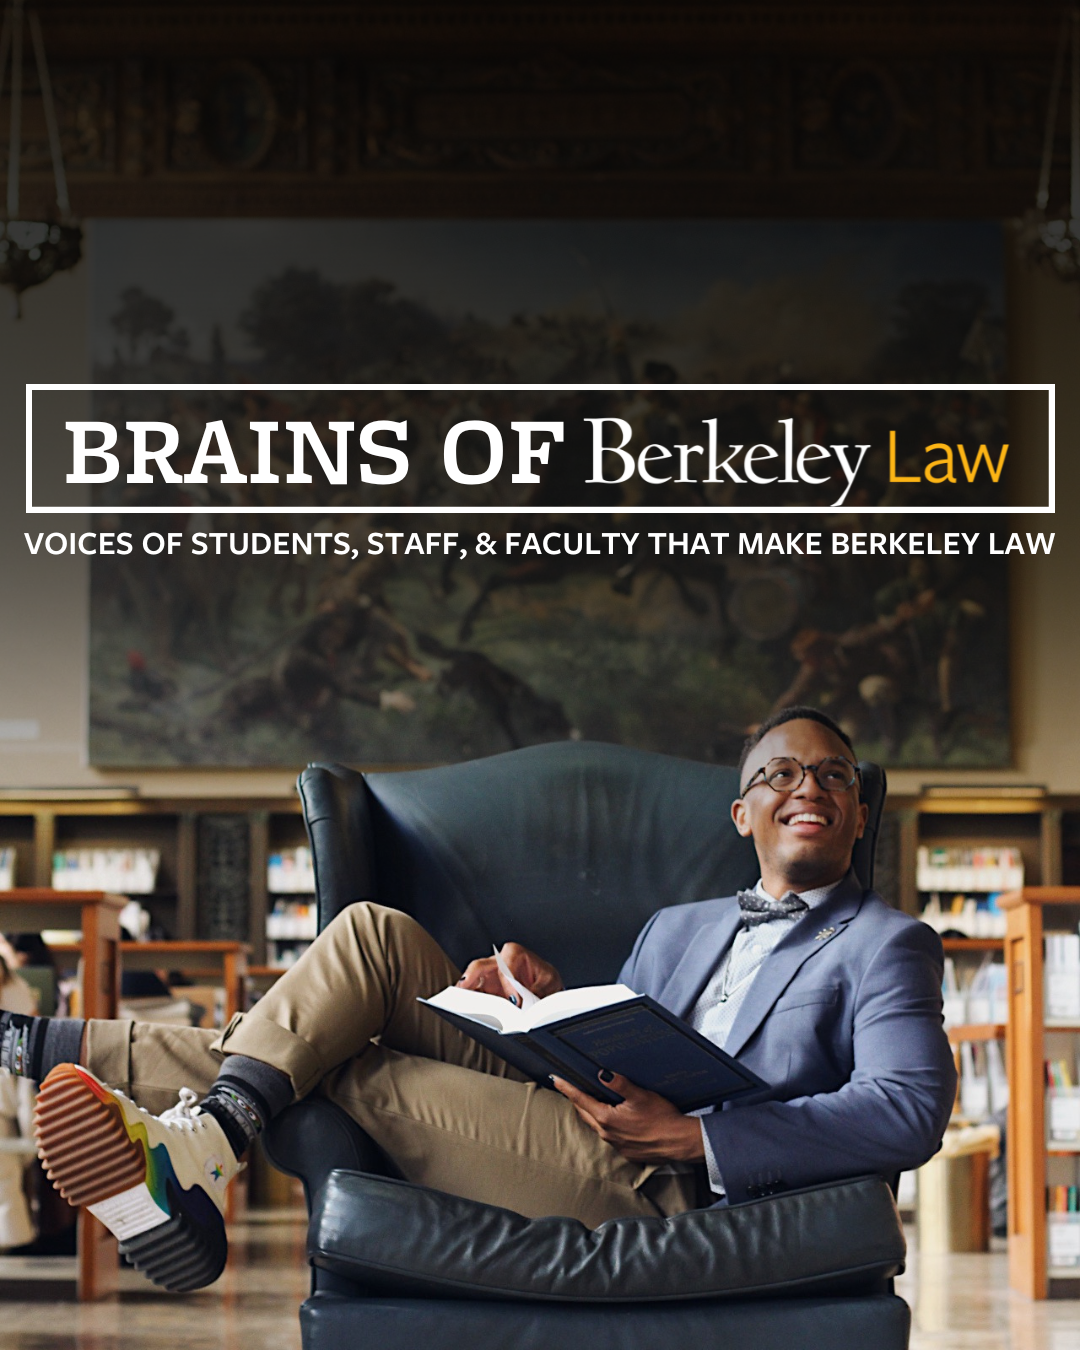 Clicking this photo will redirect you to an Instagram post of Kendrick's feature.
Kendrick sitting at Doe Library with his legs crossed on the arm rest and book resting on his lap as he smiles to his right side. Text overlaid says: "Brains of Berkeley Law: Voices of Students, Staff, and Faculty that Make Berkeley Law"